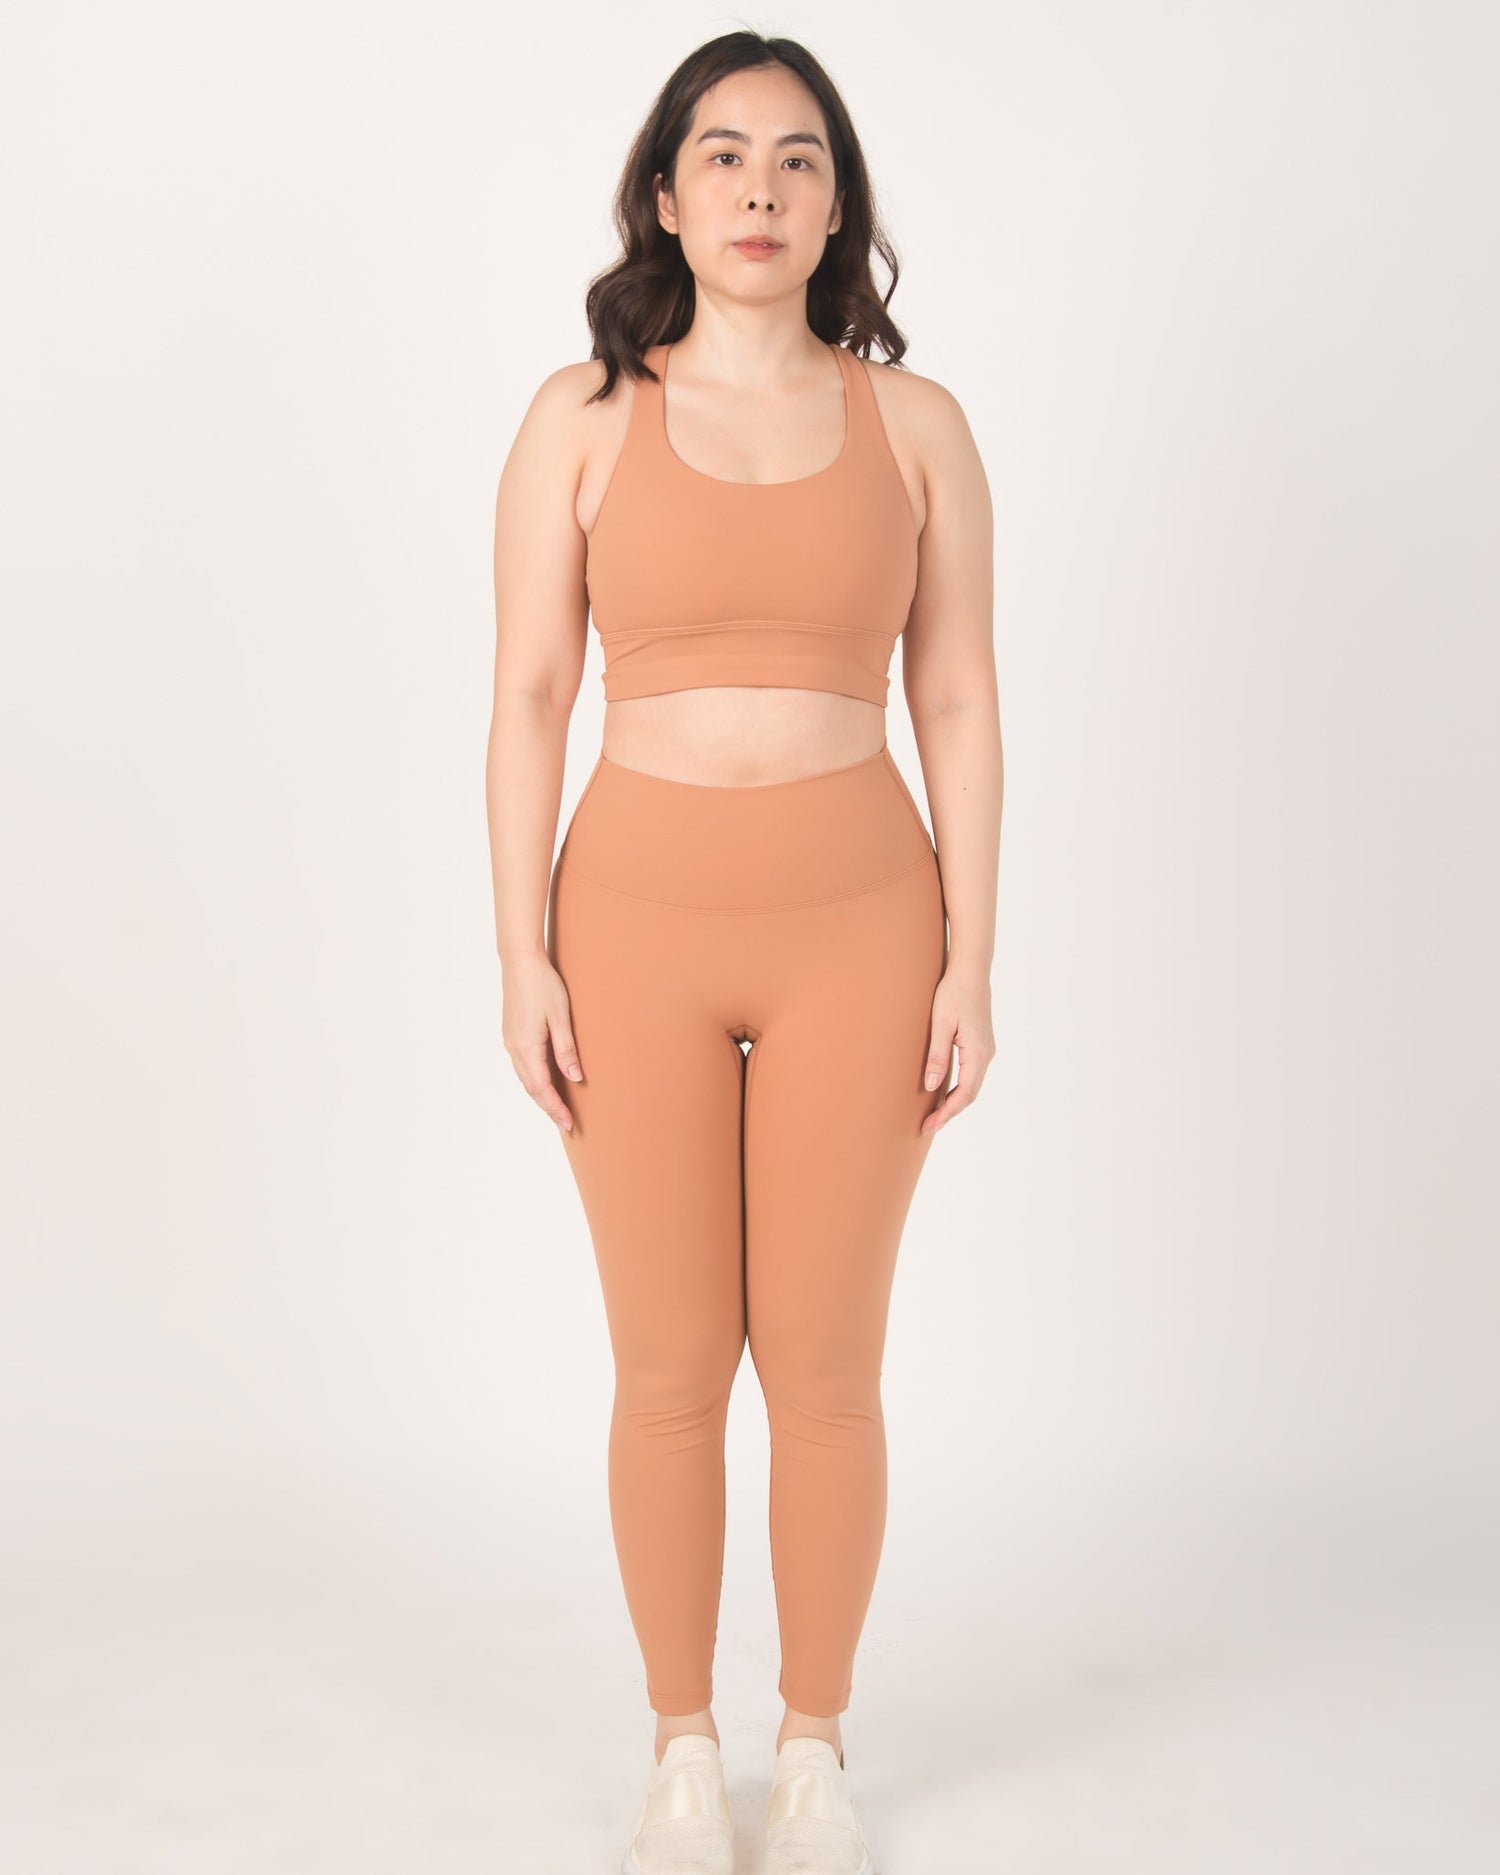 Feel good leggings in Spice - New Day Activewear